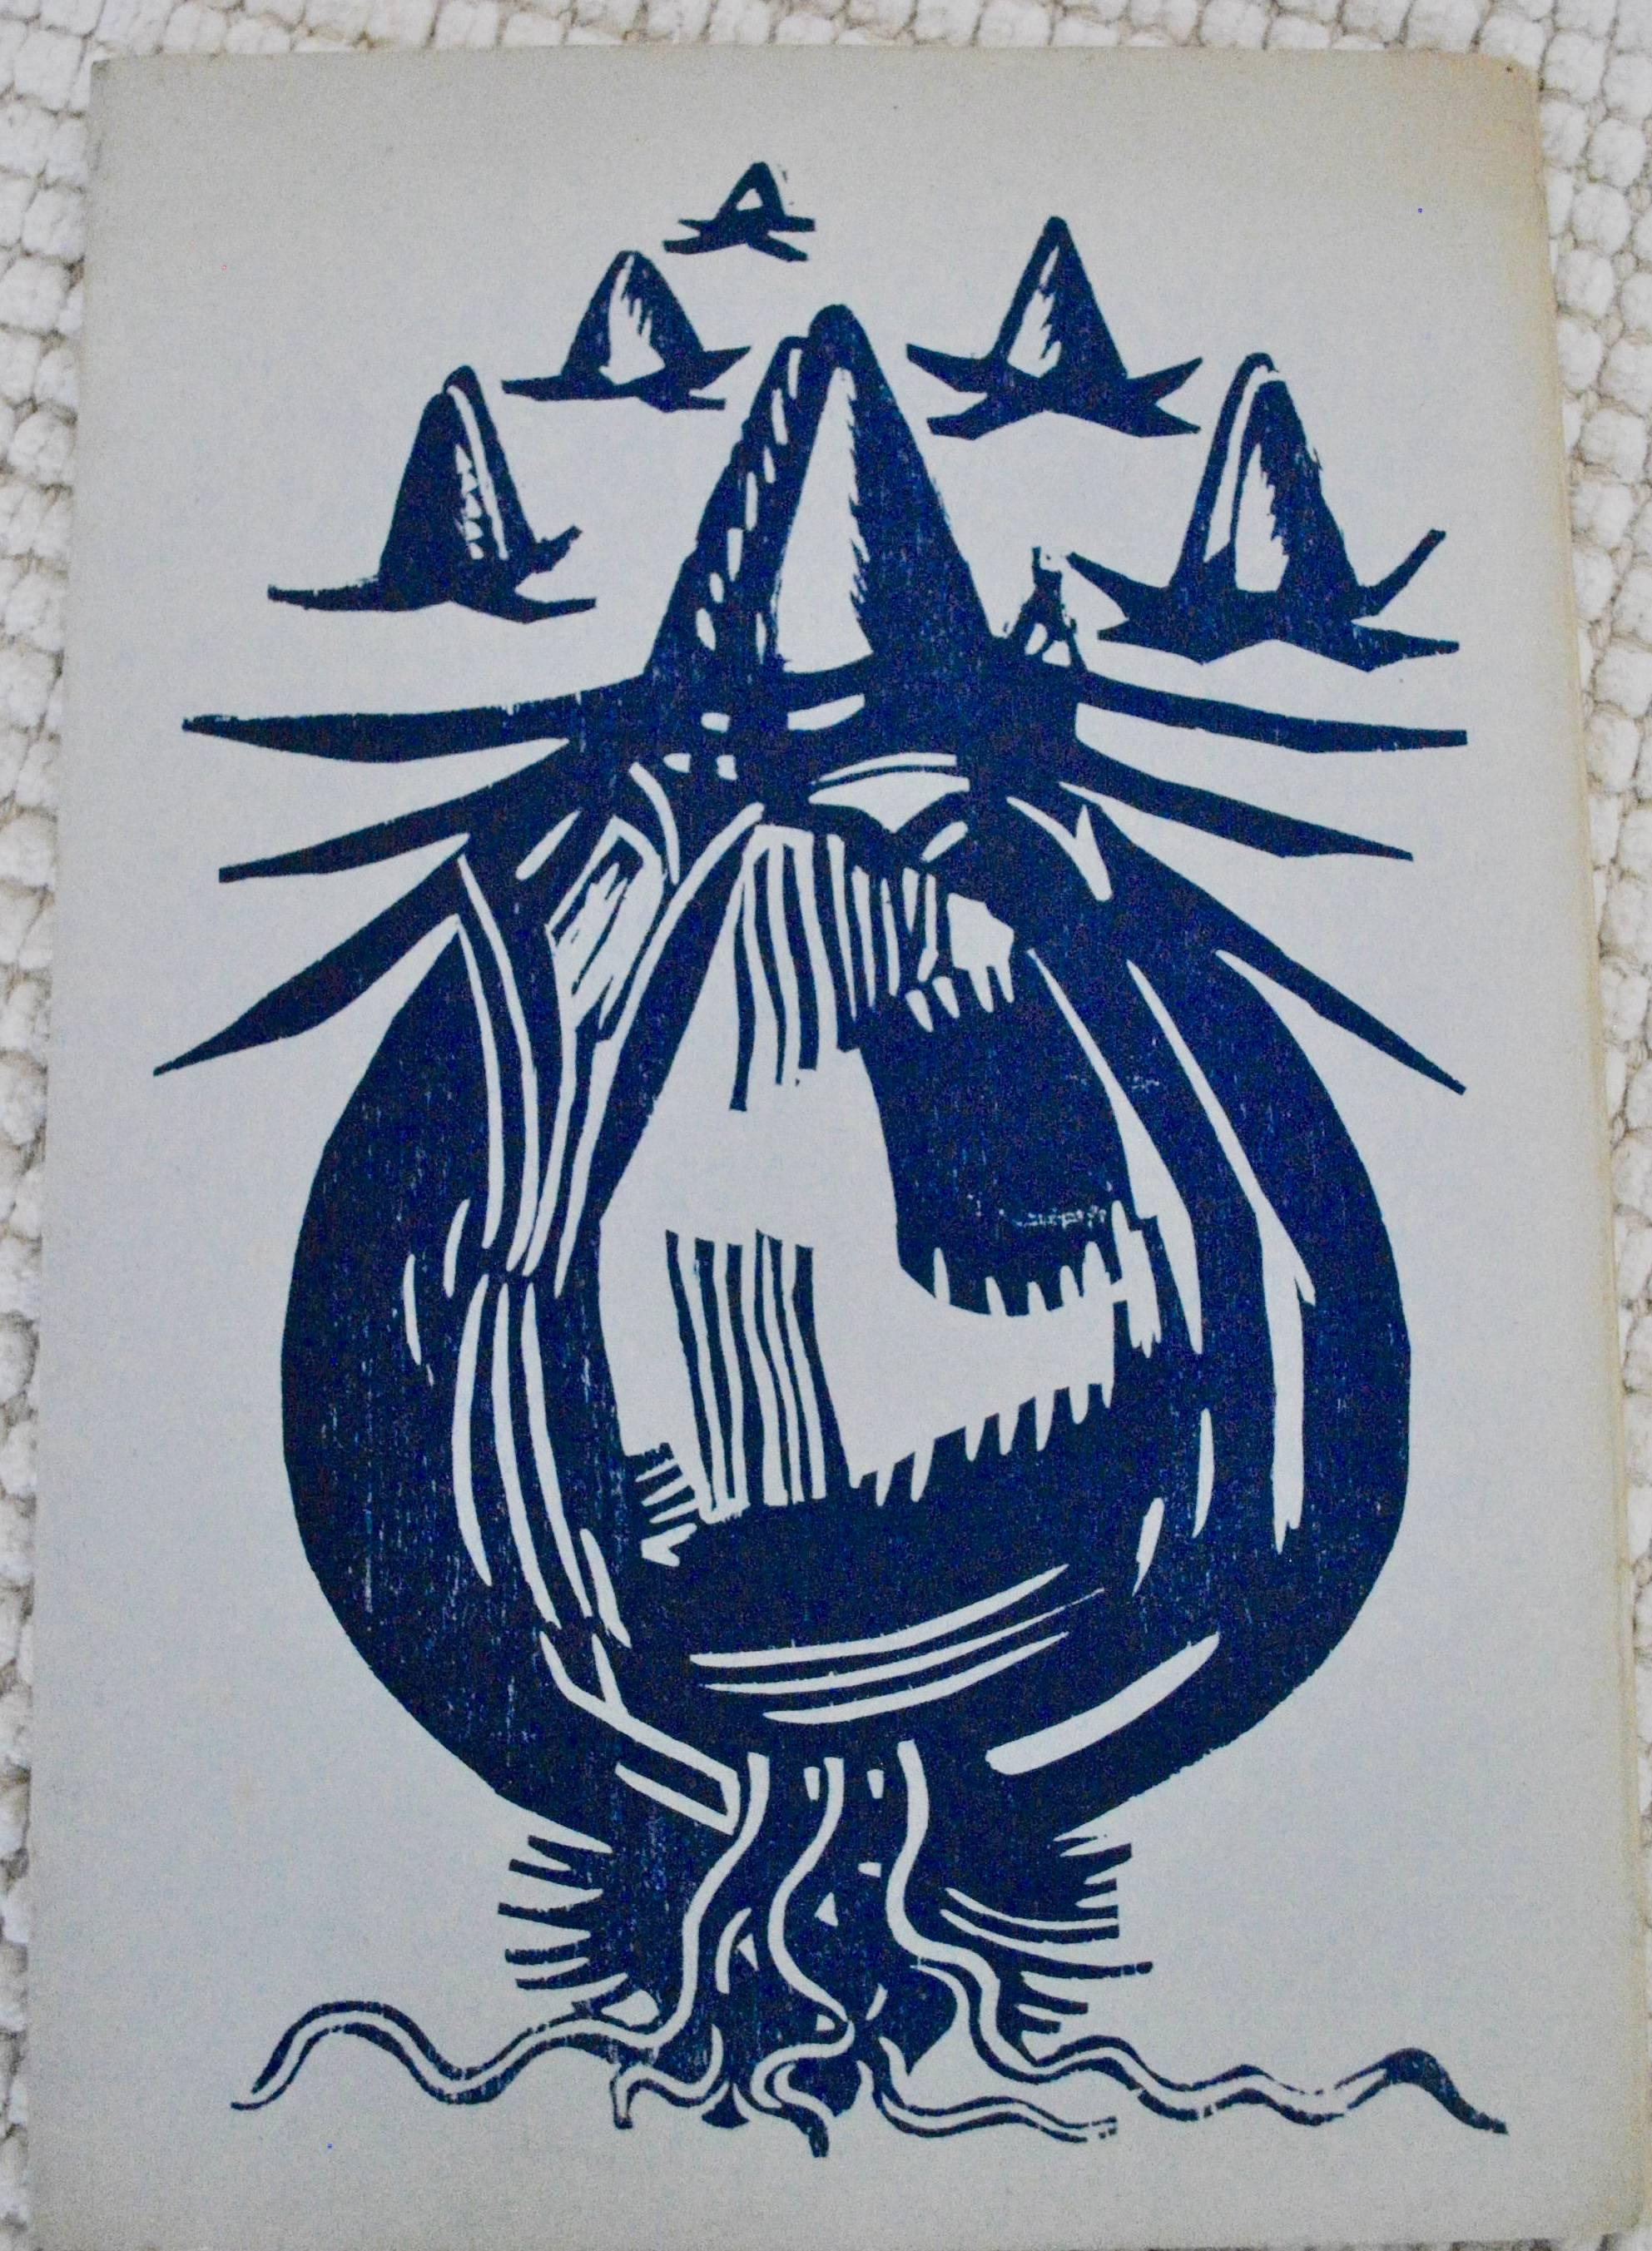 Danish Book with Woodcut by Axel Salto, Denmark, 1961